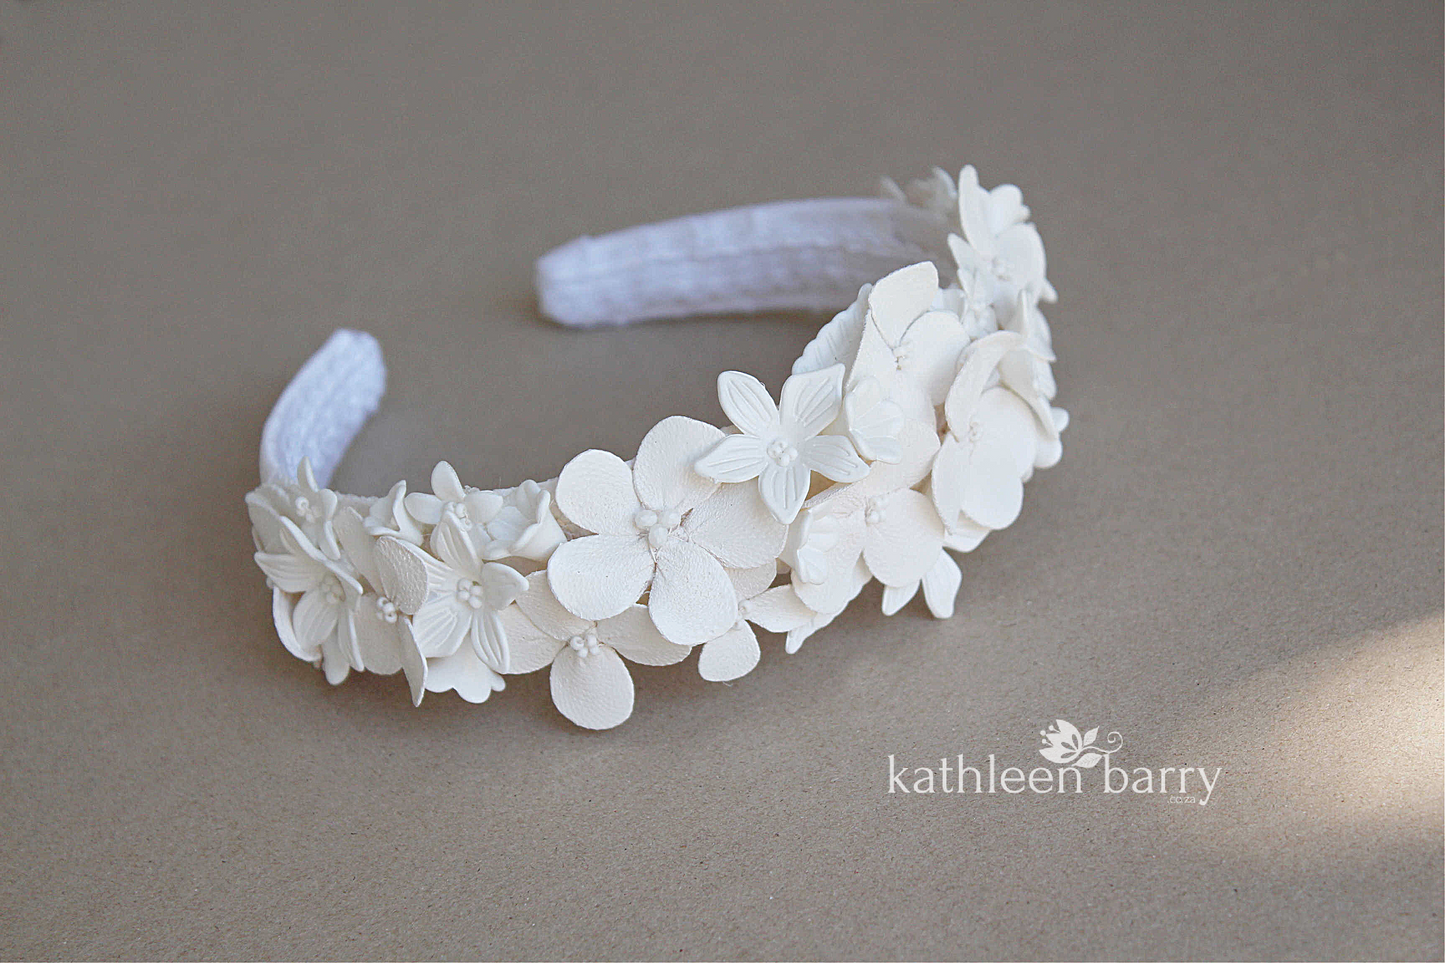 Nicola Floral headband for Nicola - Flat matte white - Color options available.